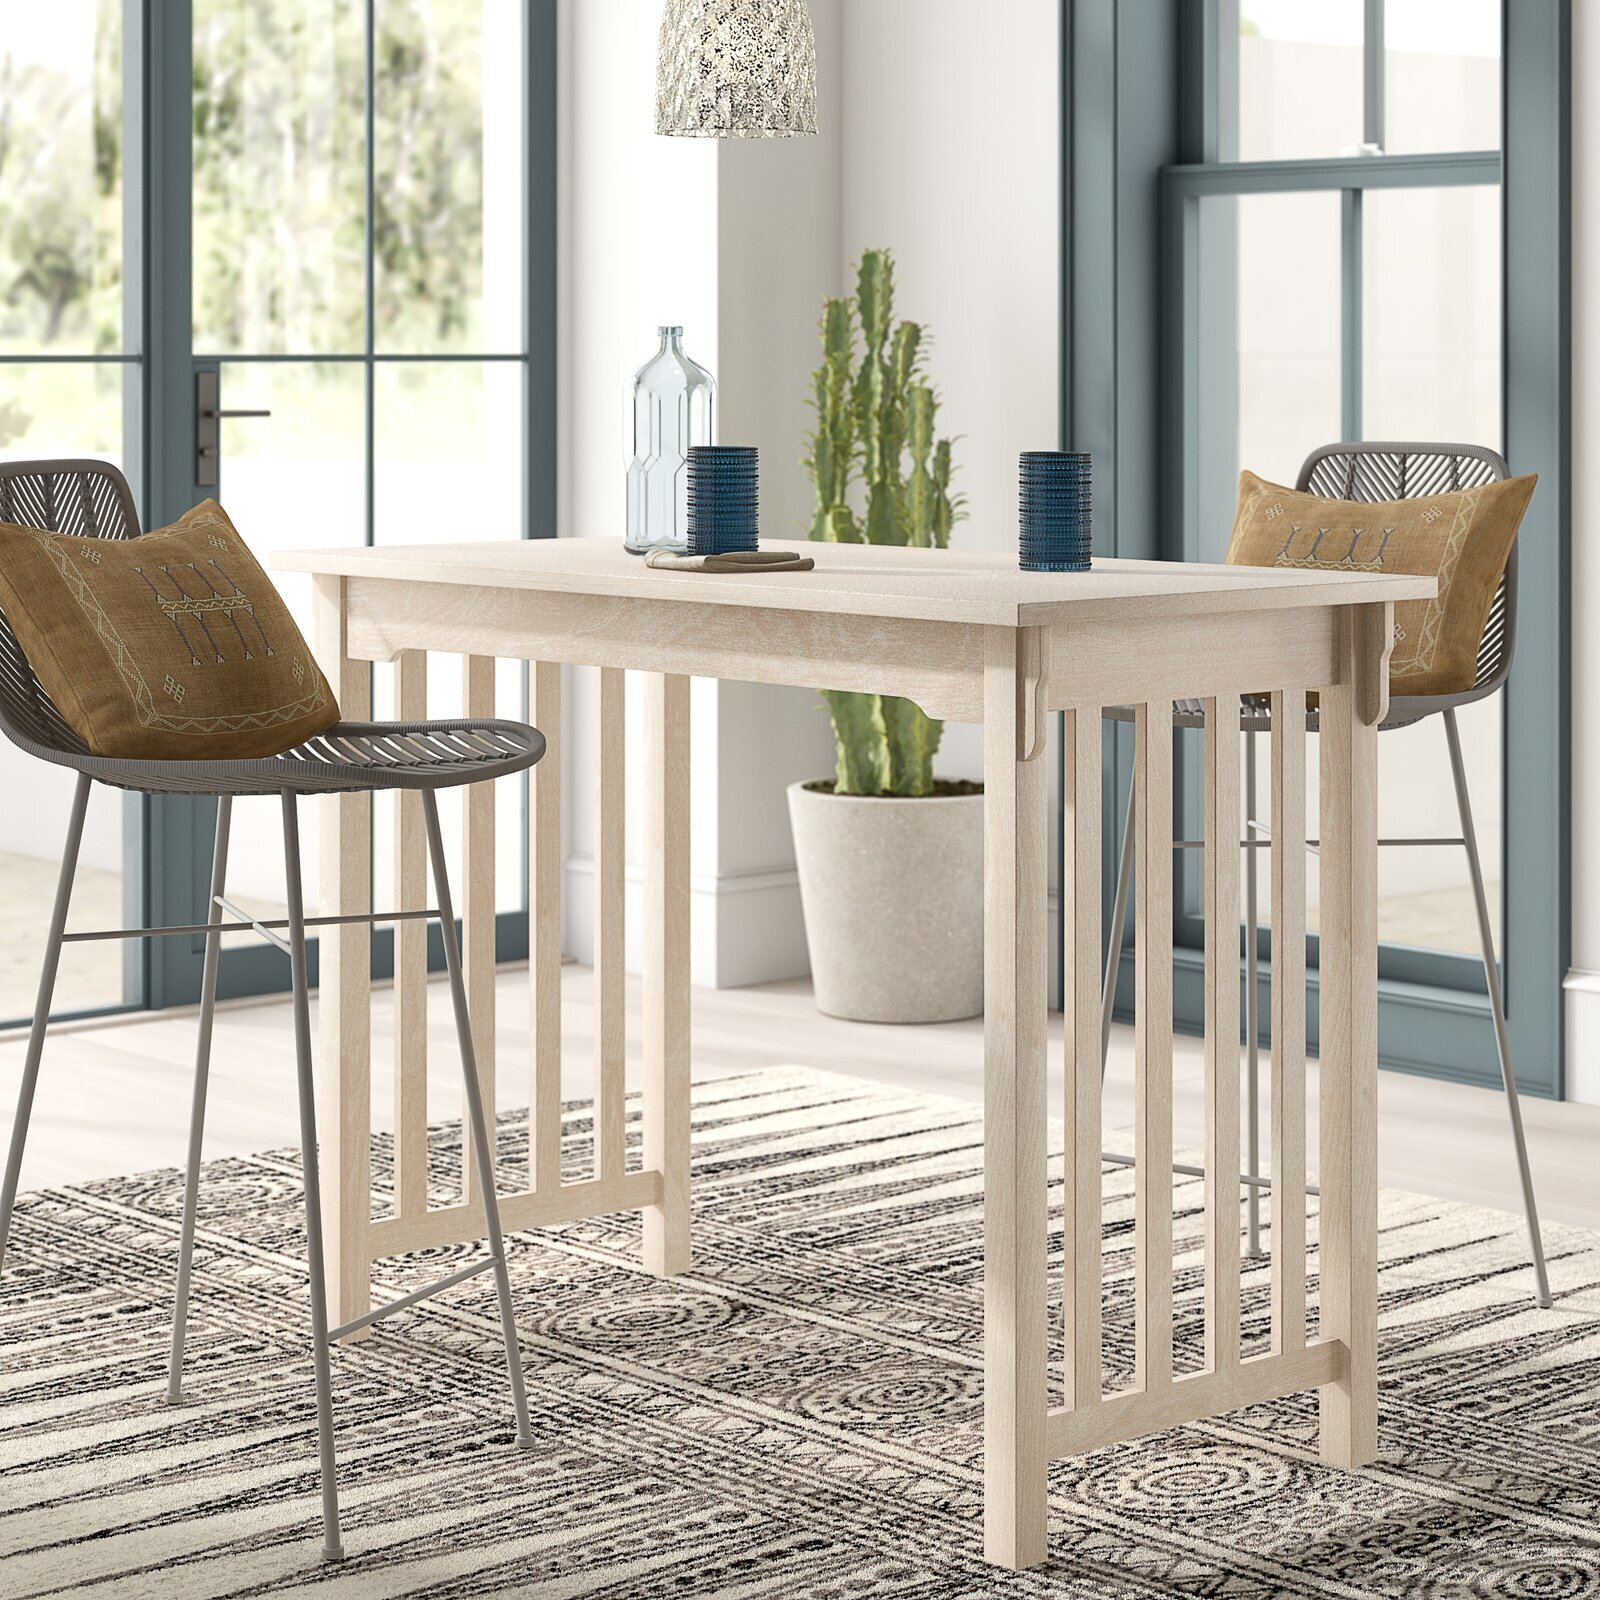 Mission style narrow counter height dining table